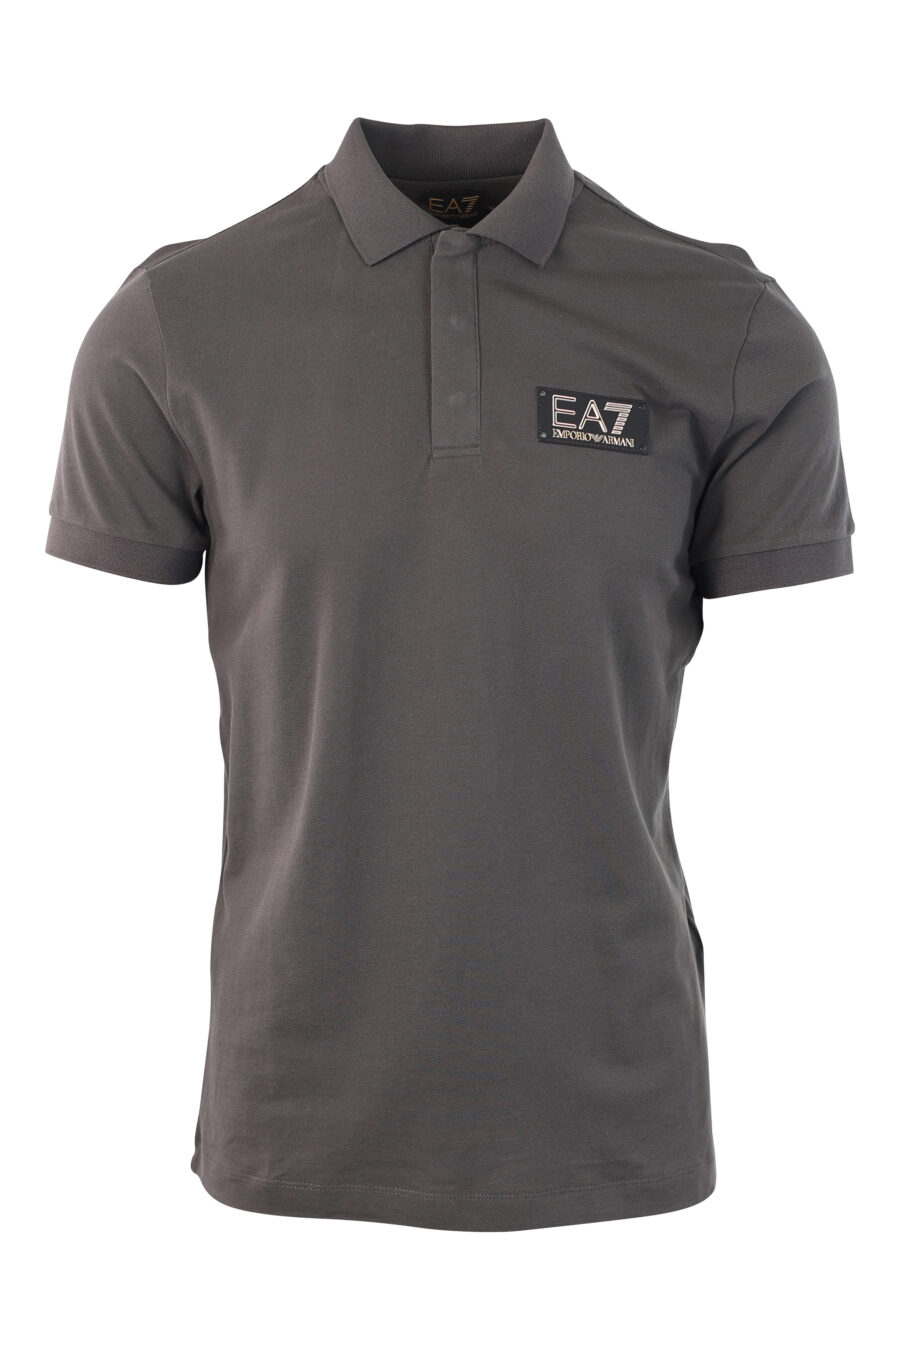 Grey polo shirt with gold-plated mini-logo - IMG 3808